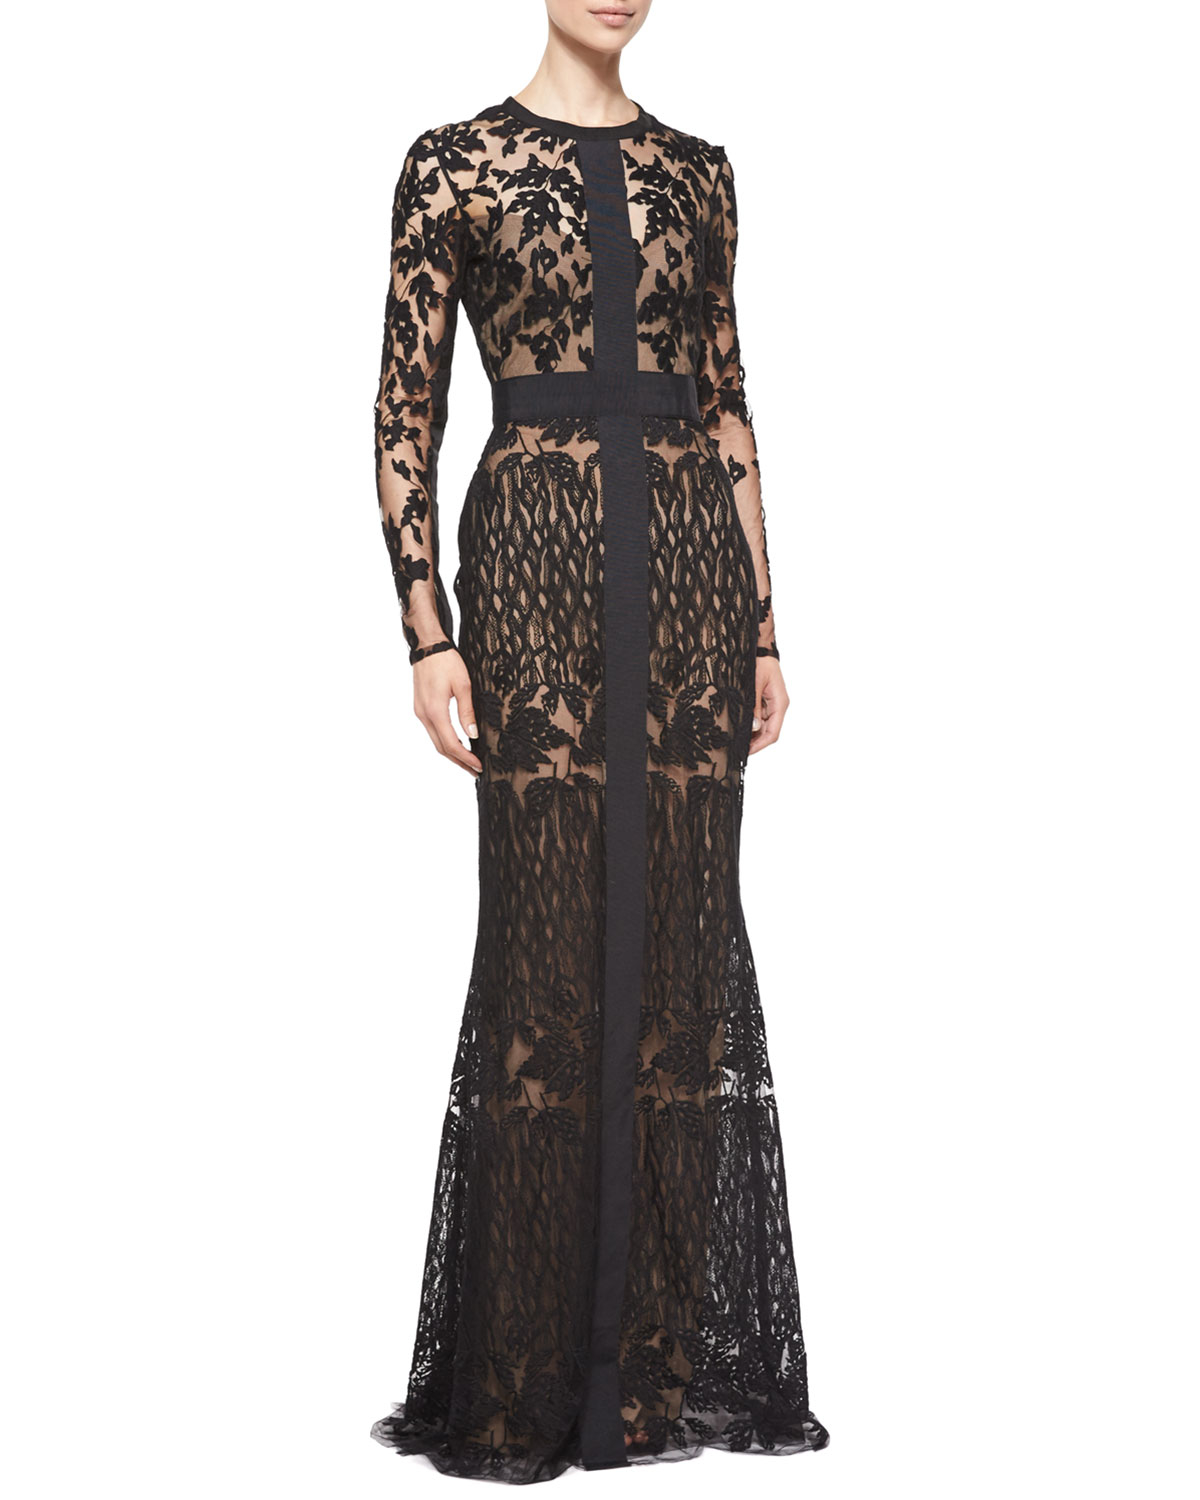 Elie saab Long-Sleeve Sheer Embroidered Lace Gown in Black | Lyst